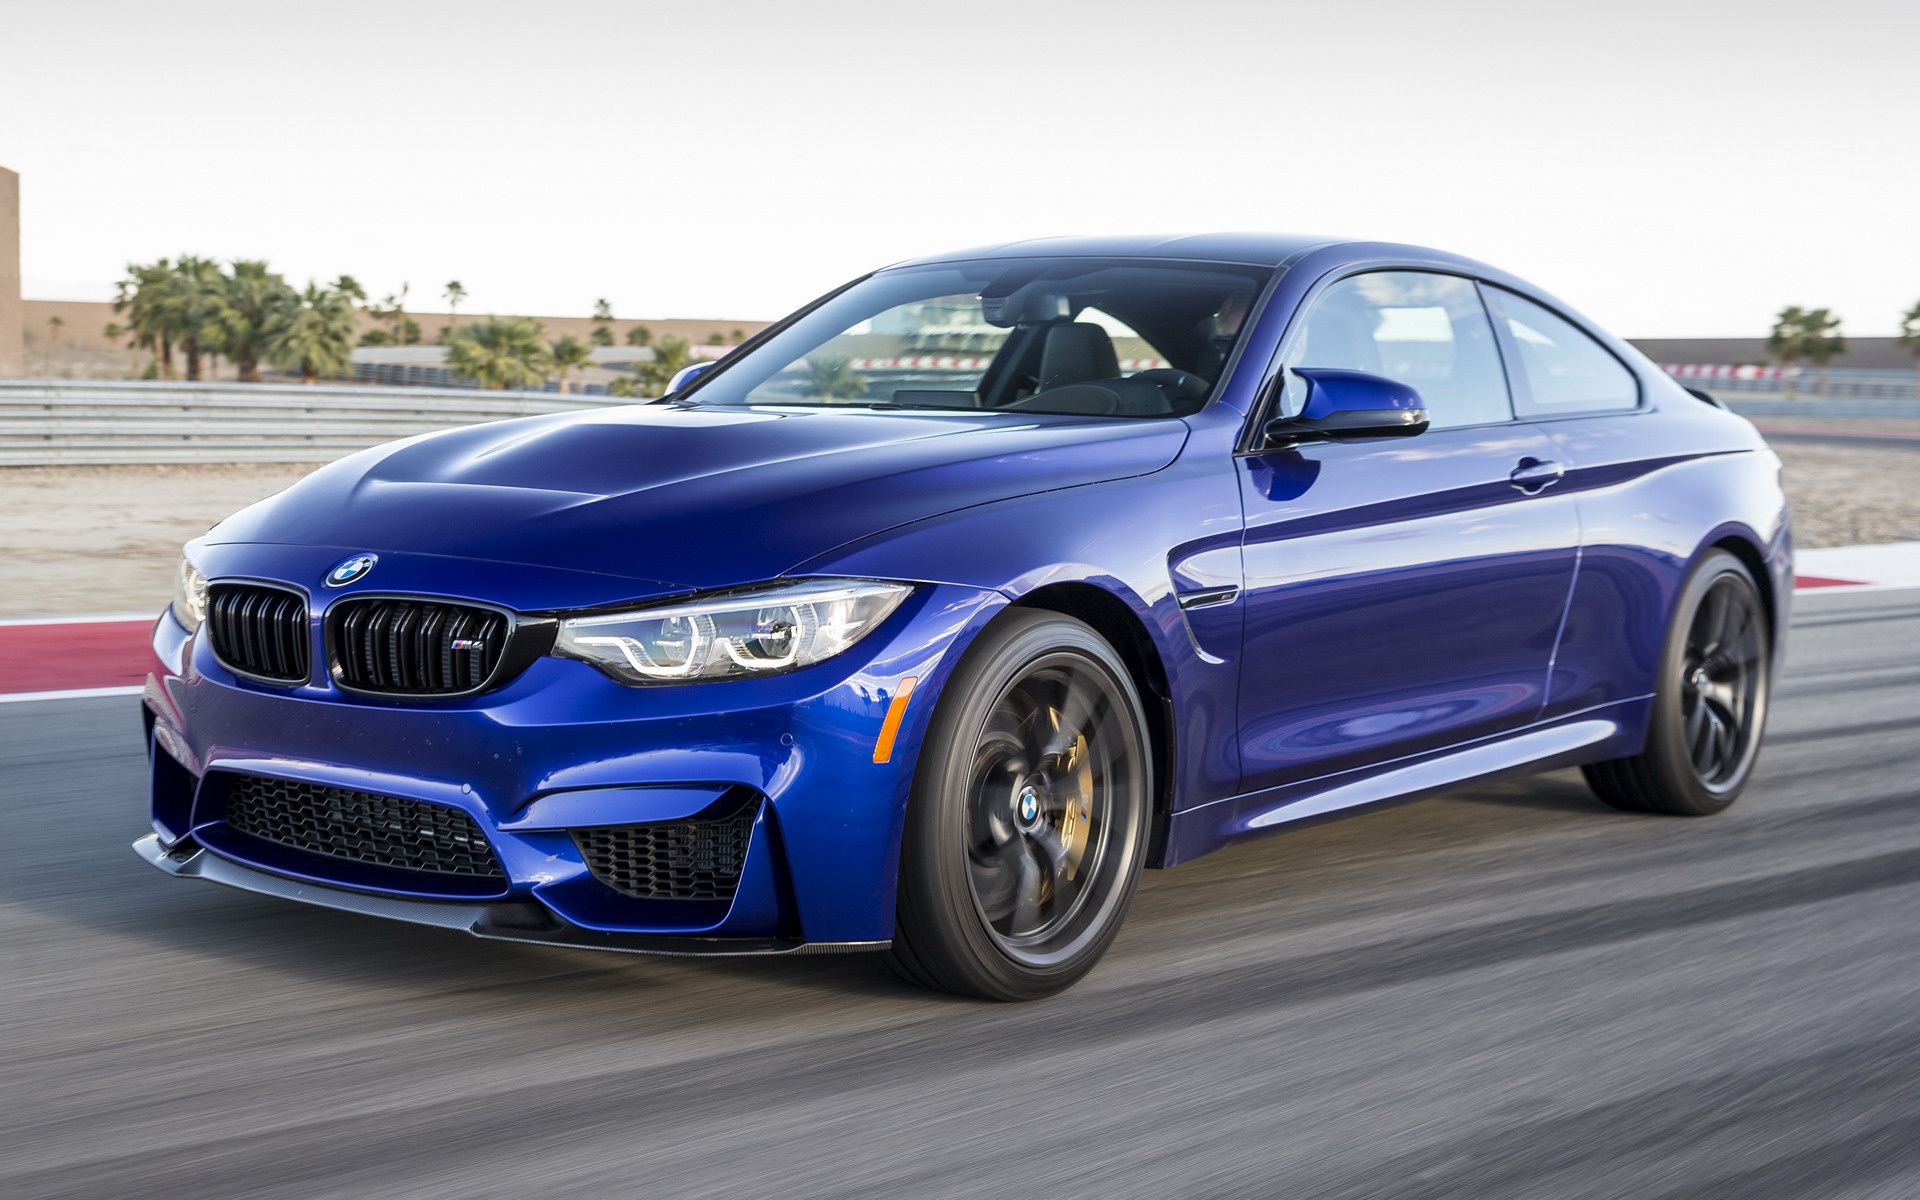 BMW M4 CS Coupe (US) and HD Image